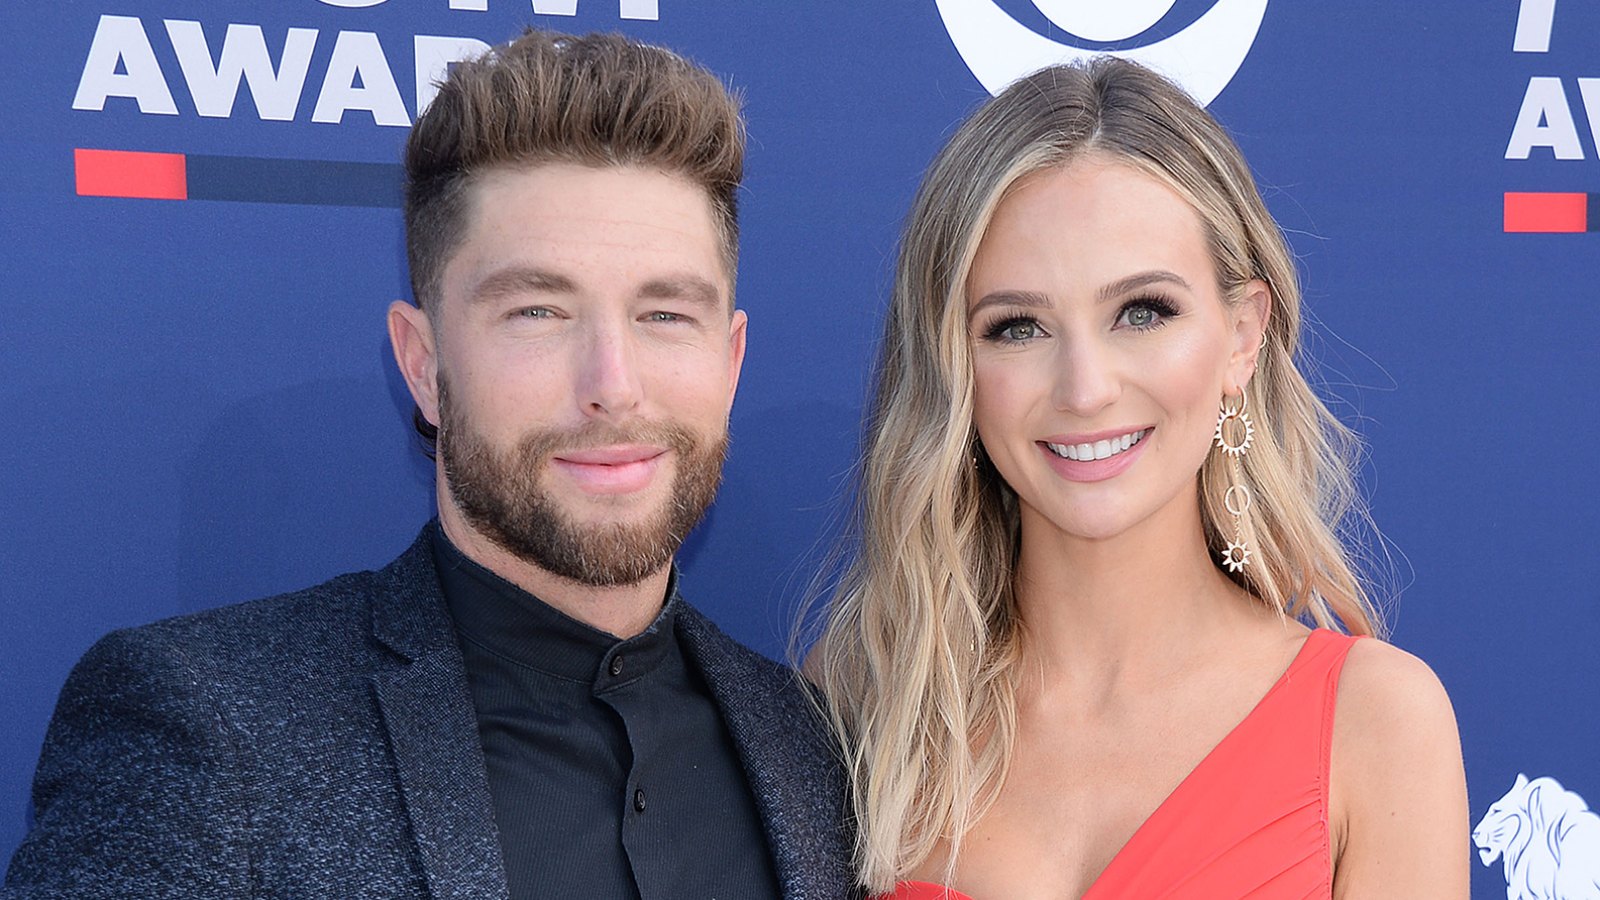 Lauren Bushnell and Chris Lane’s Decision to Tie the Knot 4 Months After Getting Engaged